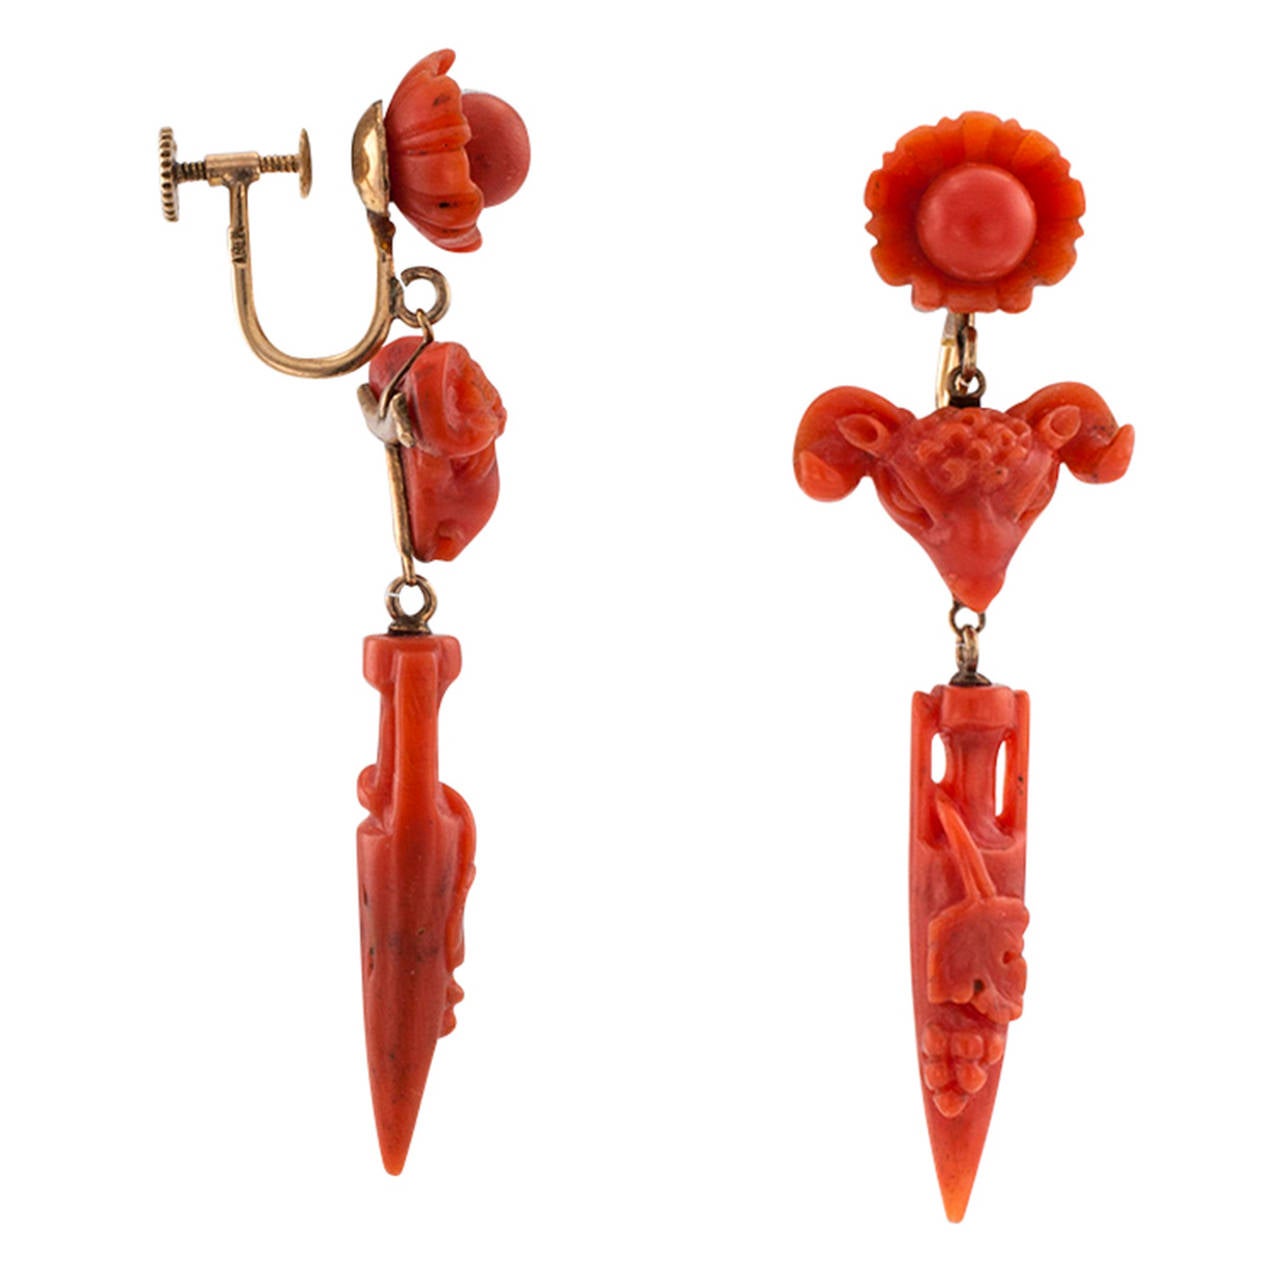 Carved Coral Victorian Archaeological Revival Pendent Earrings

The articulated designs are a composition derived from three distinct, richly carved,  red coral components.  The surmounts are shaped as a pearl in a clam shell, connected to ram's